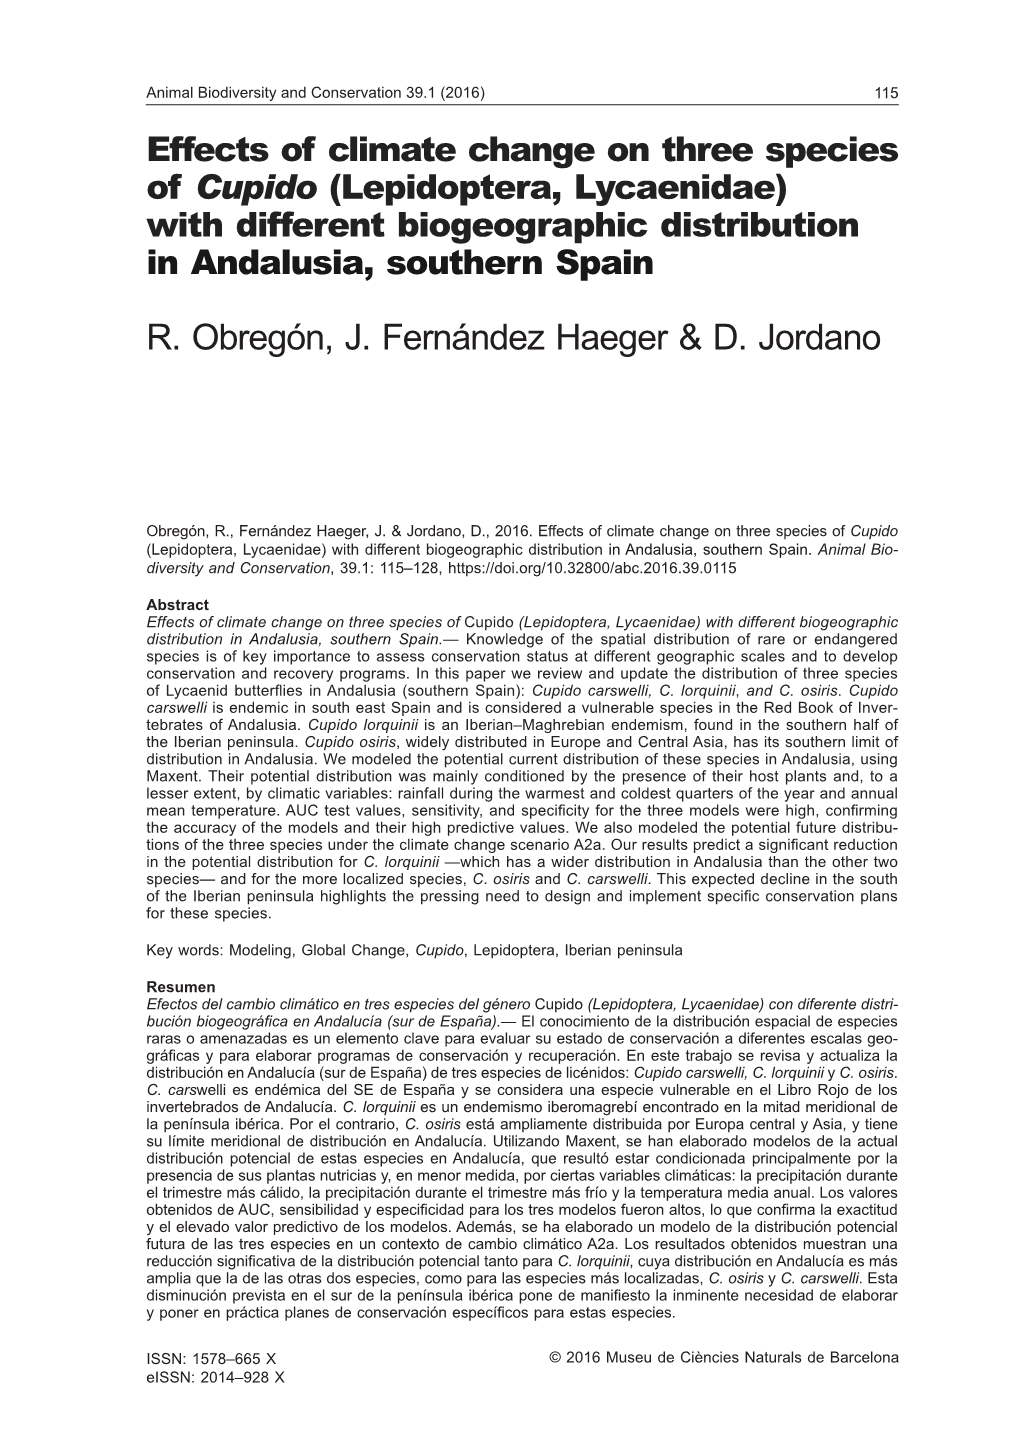 Effects of Climate Change on Three Species of Cupido (Lepidoptera, Lycaenidae) with Different Biogeographic Distribution in Andalusia, Southern Spain